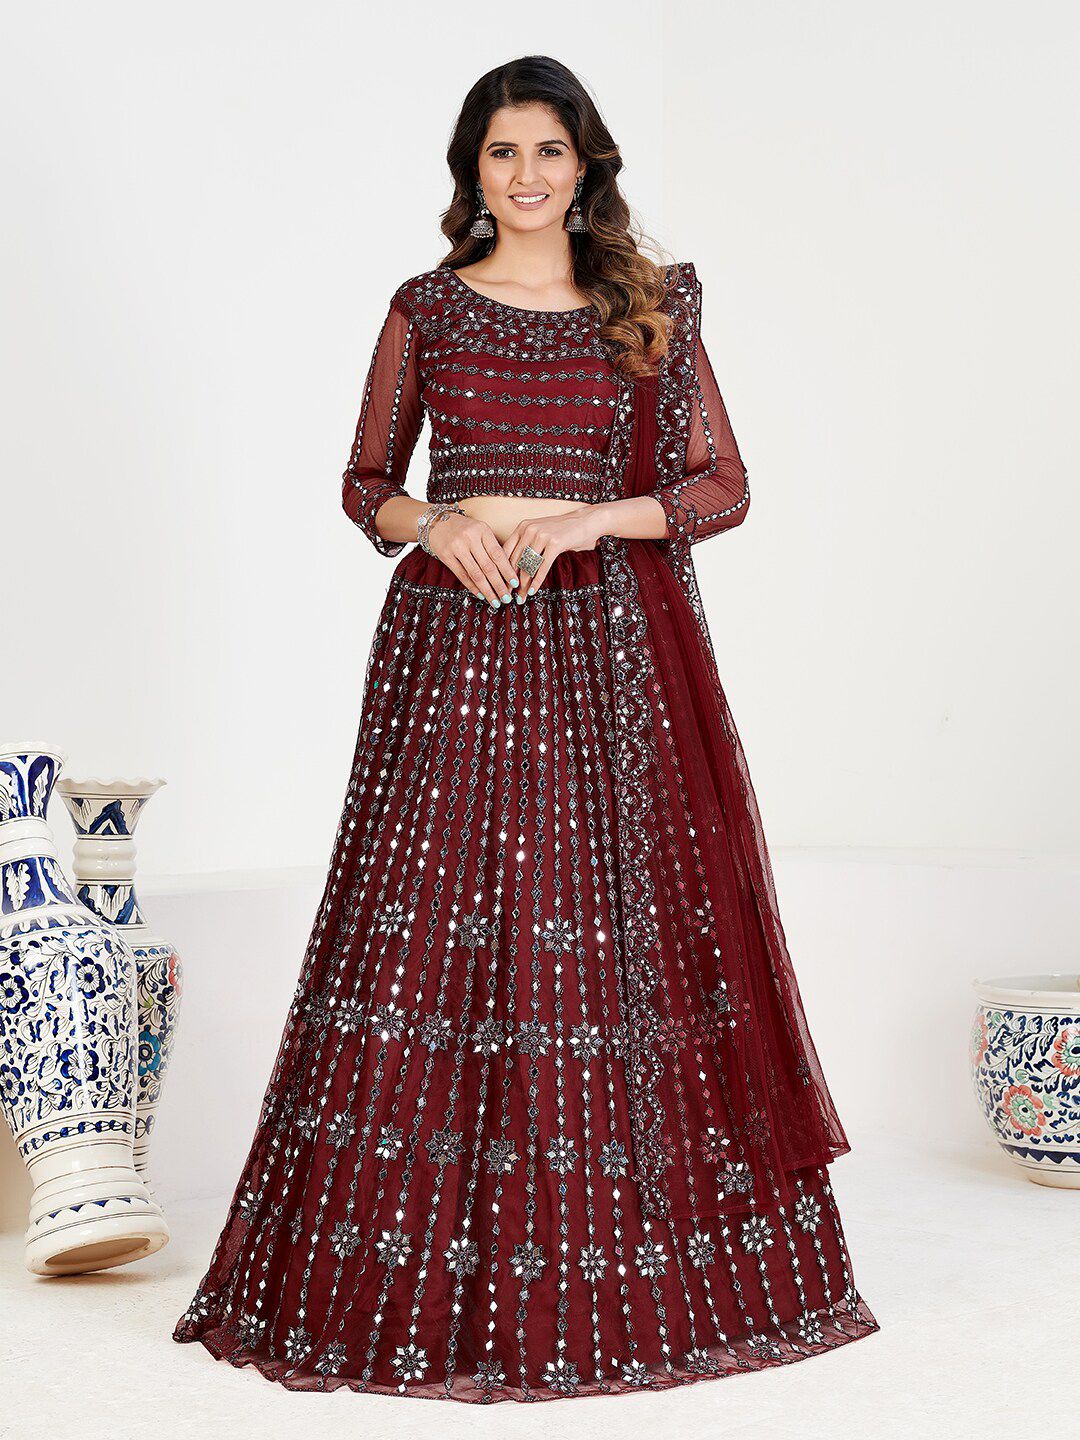 SHOPGARB Maroon Mirror Work Semi-Stitched Lehenga & Unstitched Blouse With Dupatta Price in India